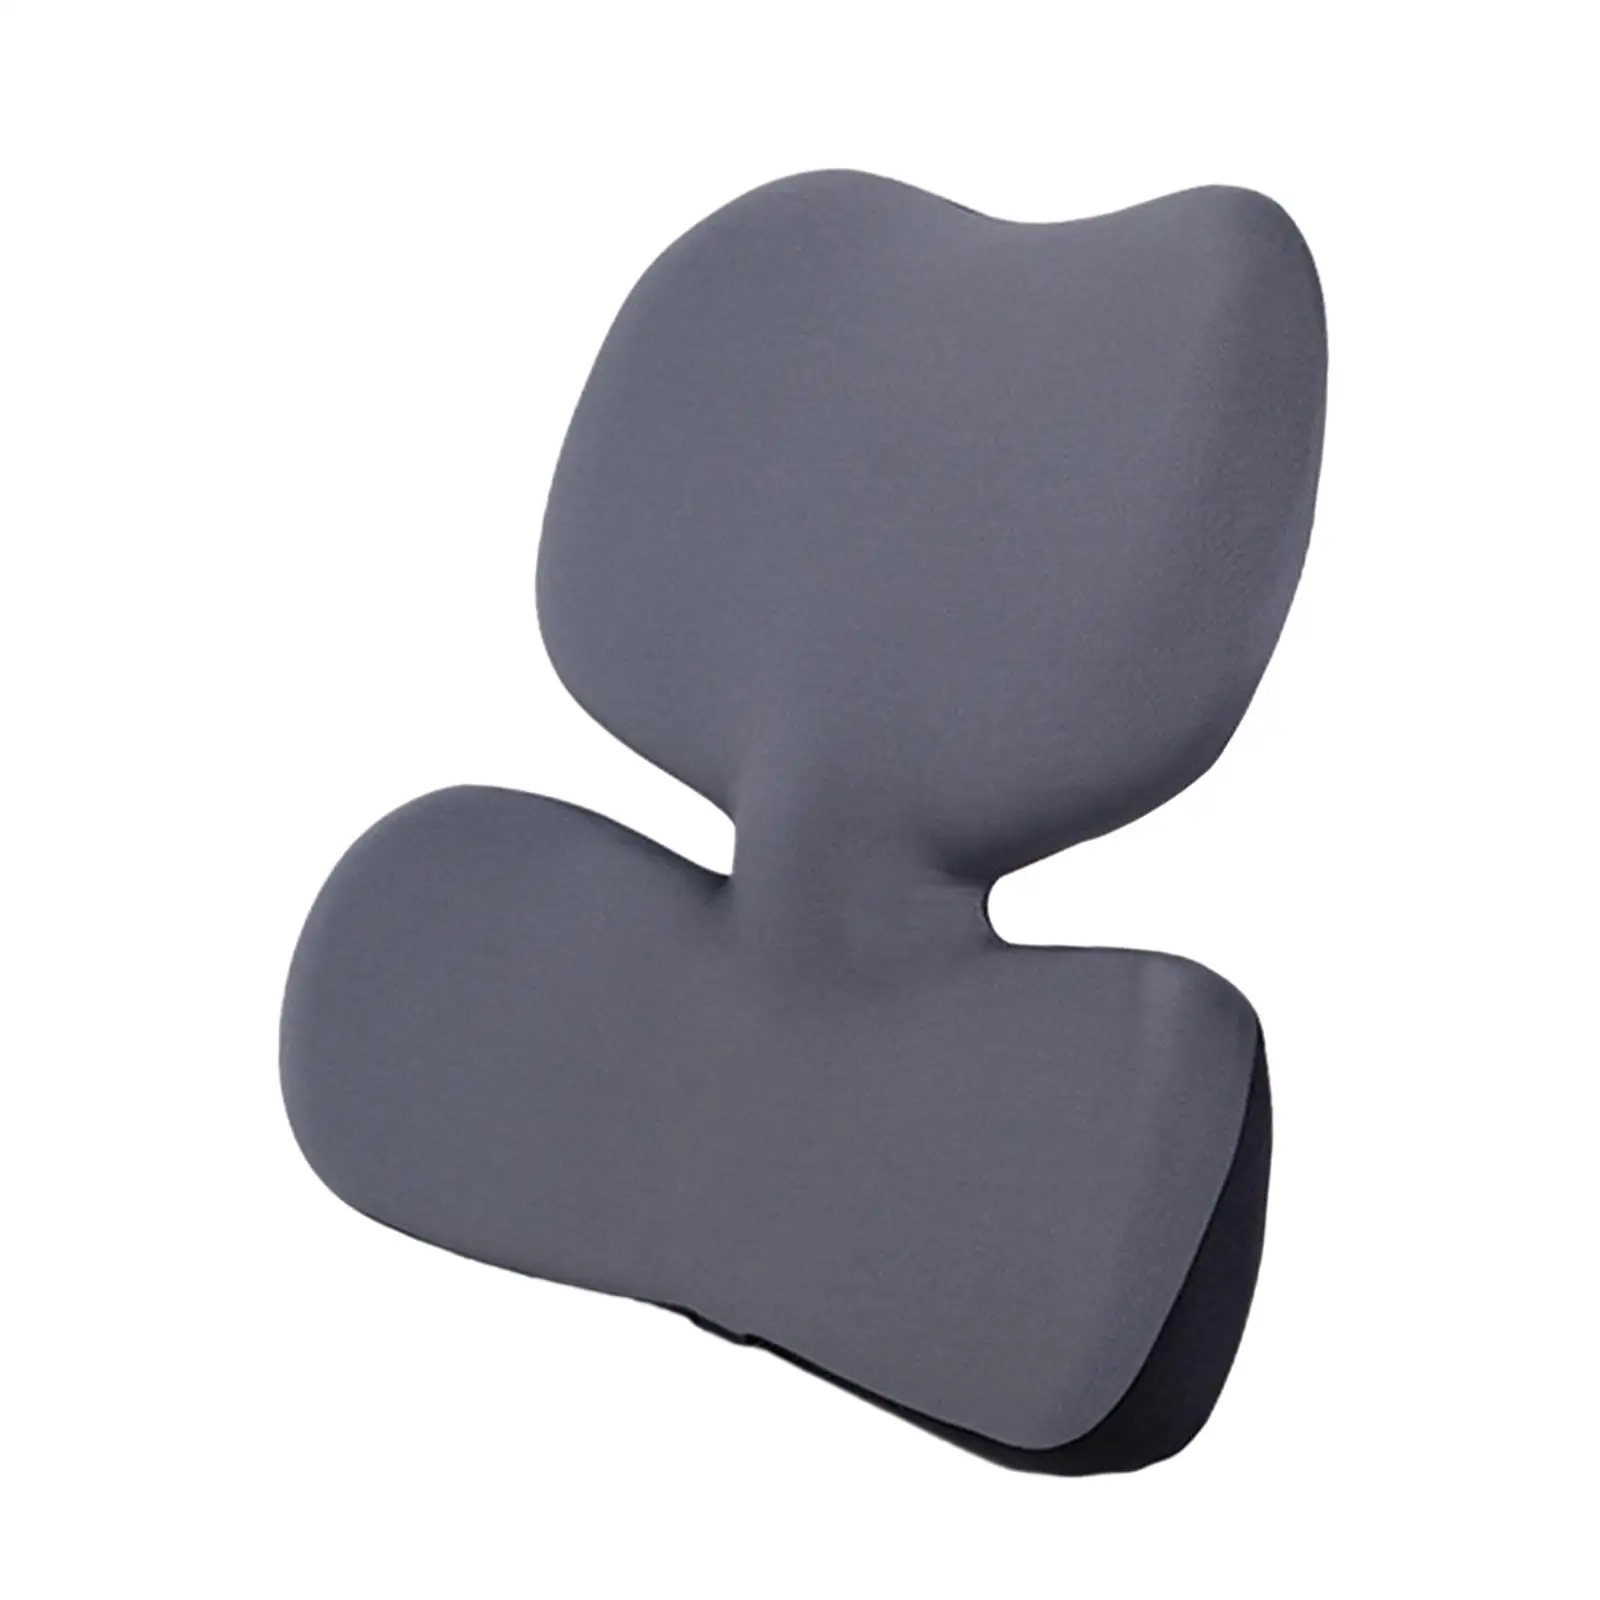 Lumbar Support Pillow Comfortable Soft Back Cushion Backrest Waist Cushion for Bedroom Gaming Chair Livingroom Sofa Dormitory